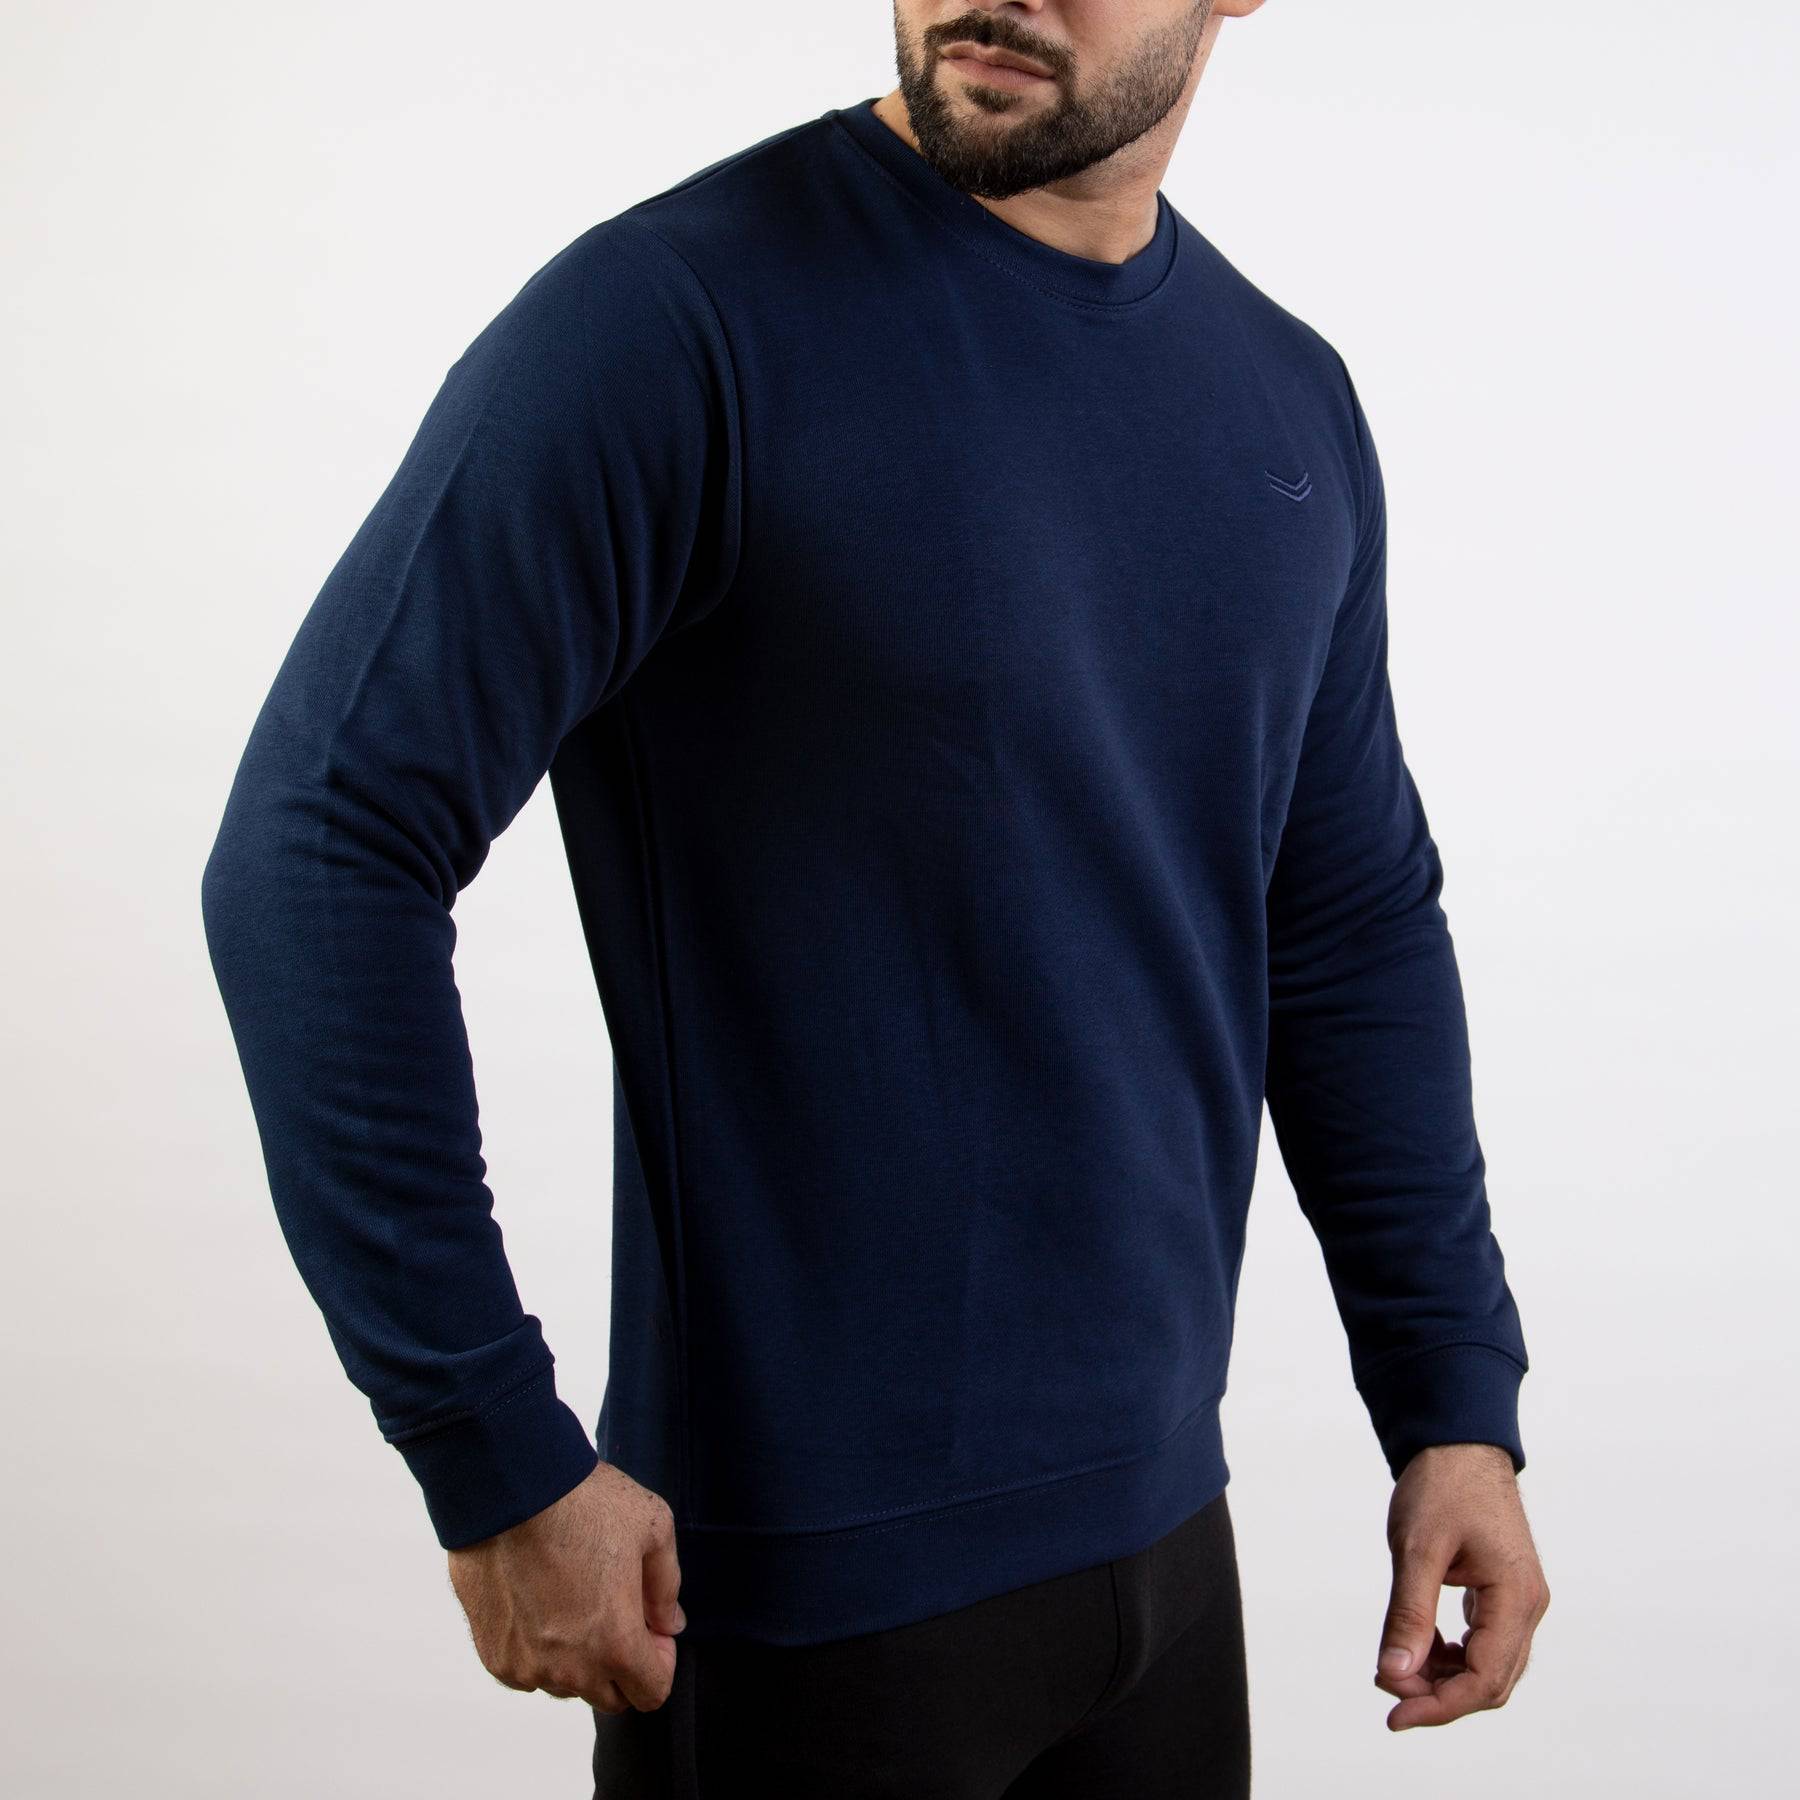 Navy Sweatshirt With Embroidered Logo - Valetica Sports